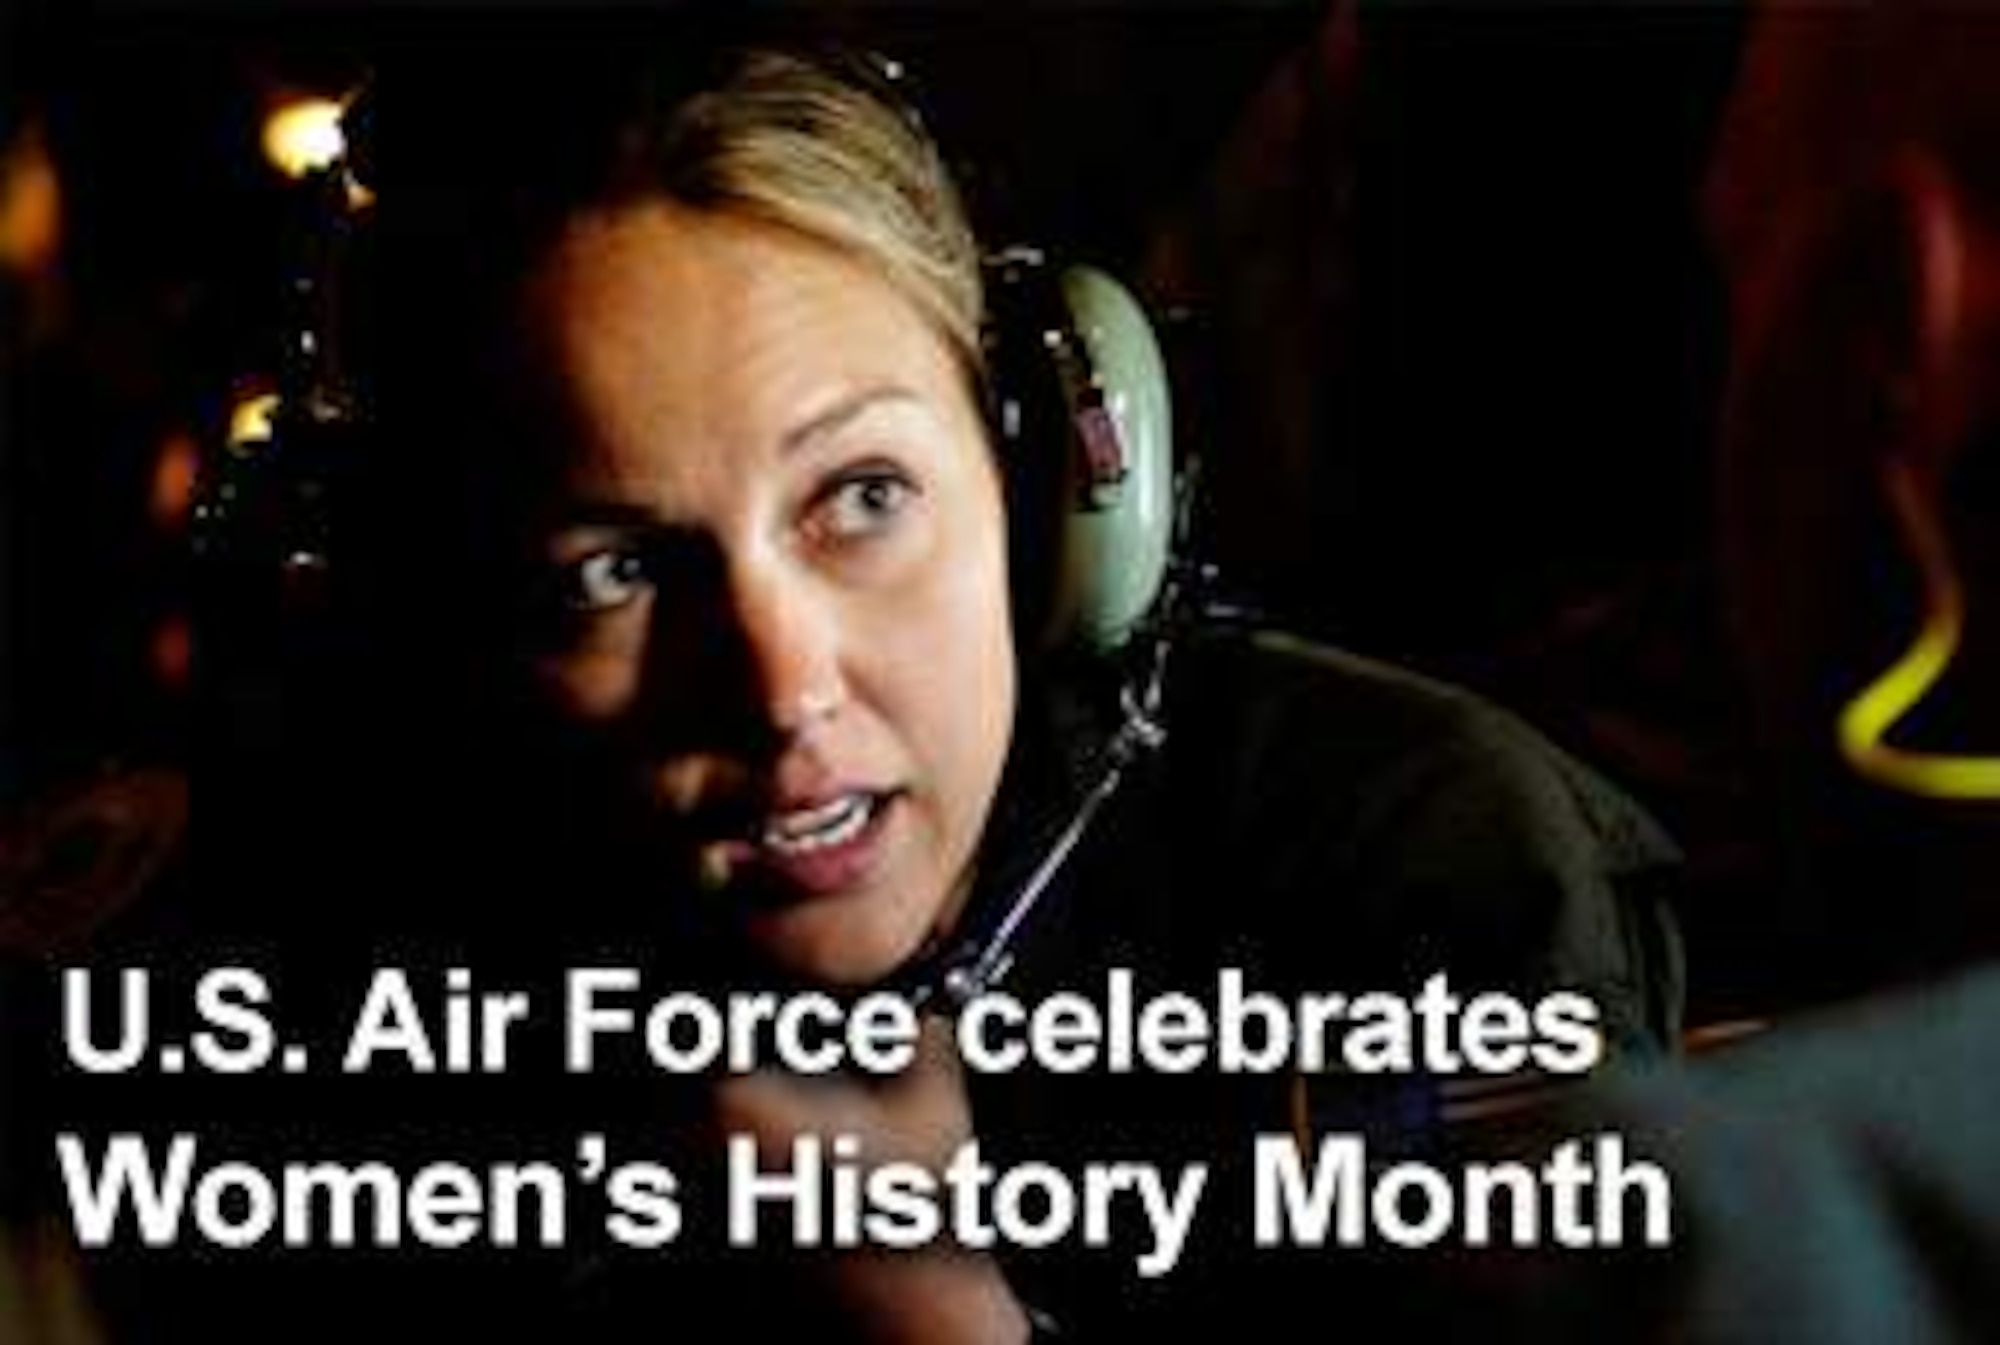 Women in the Air Force are featured this month on Air Force Link with photos, media presentations and downloadable posters. (U.S. Air Force illustration)